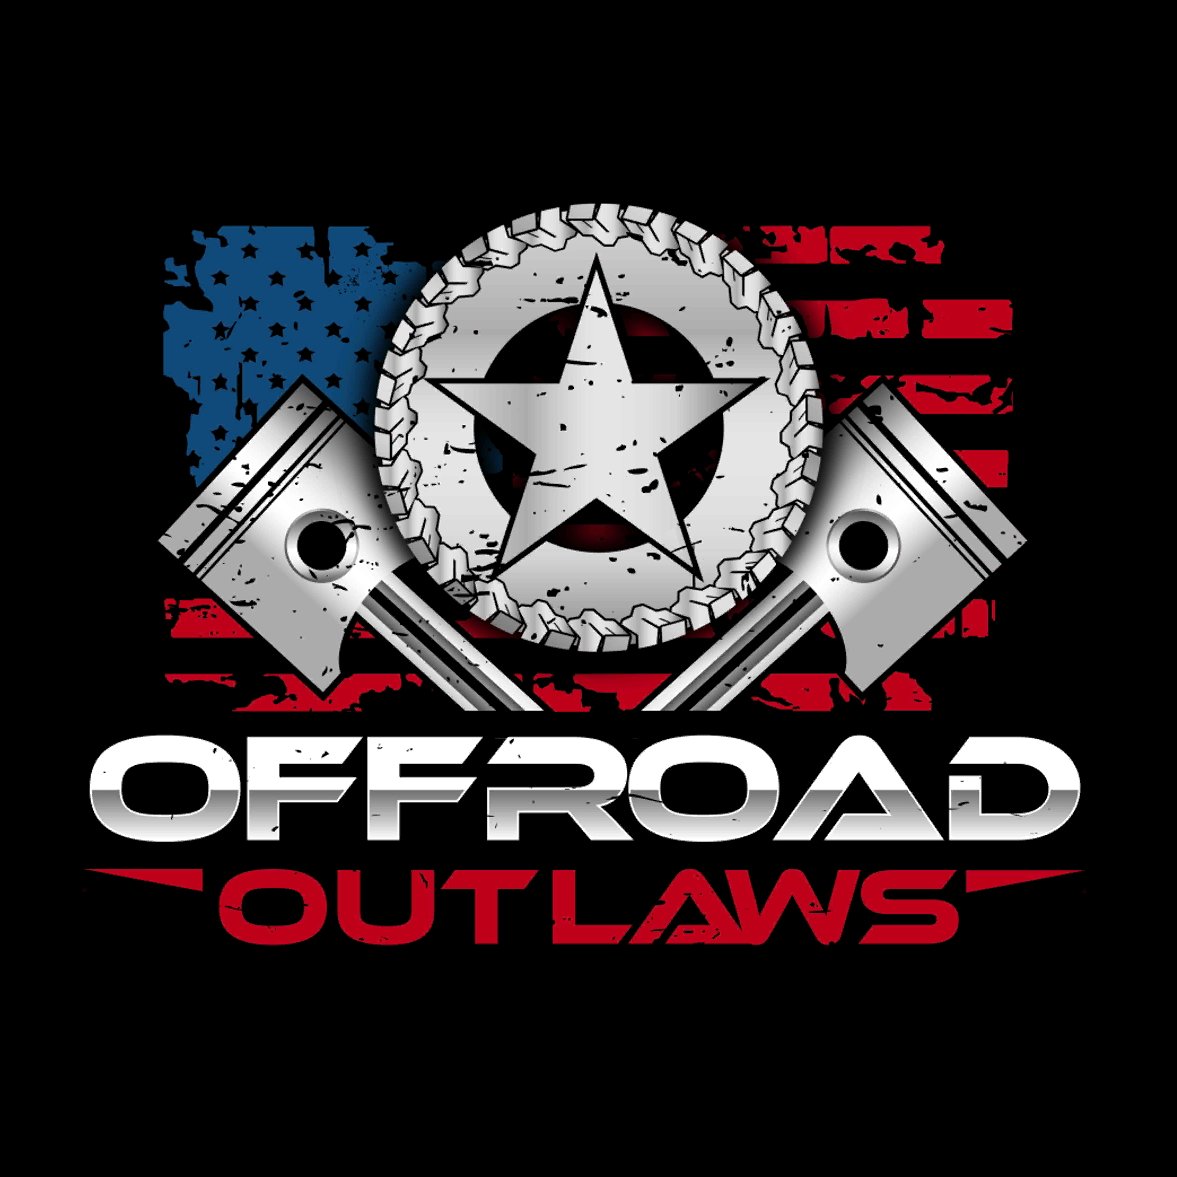 Offroad Outlaws New Barn Find - Offroad Outlaws - Posts | Facebook - Find answers for offroad ...